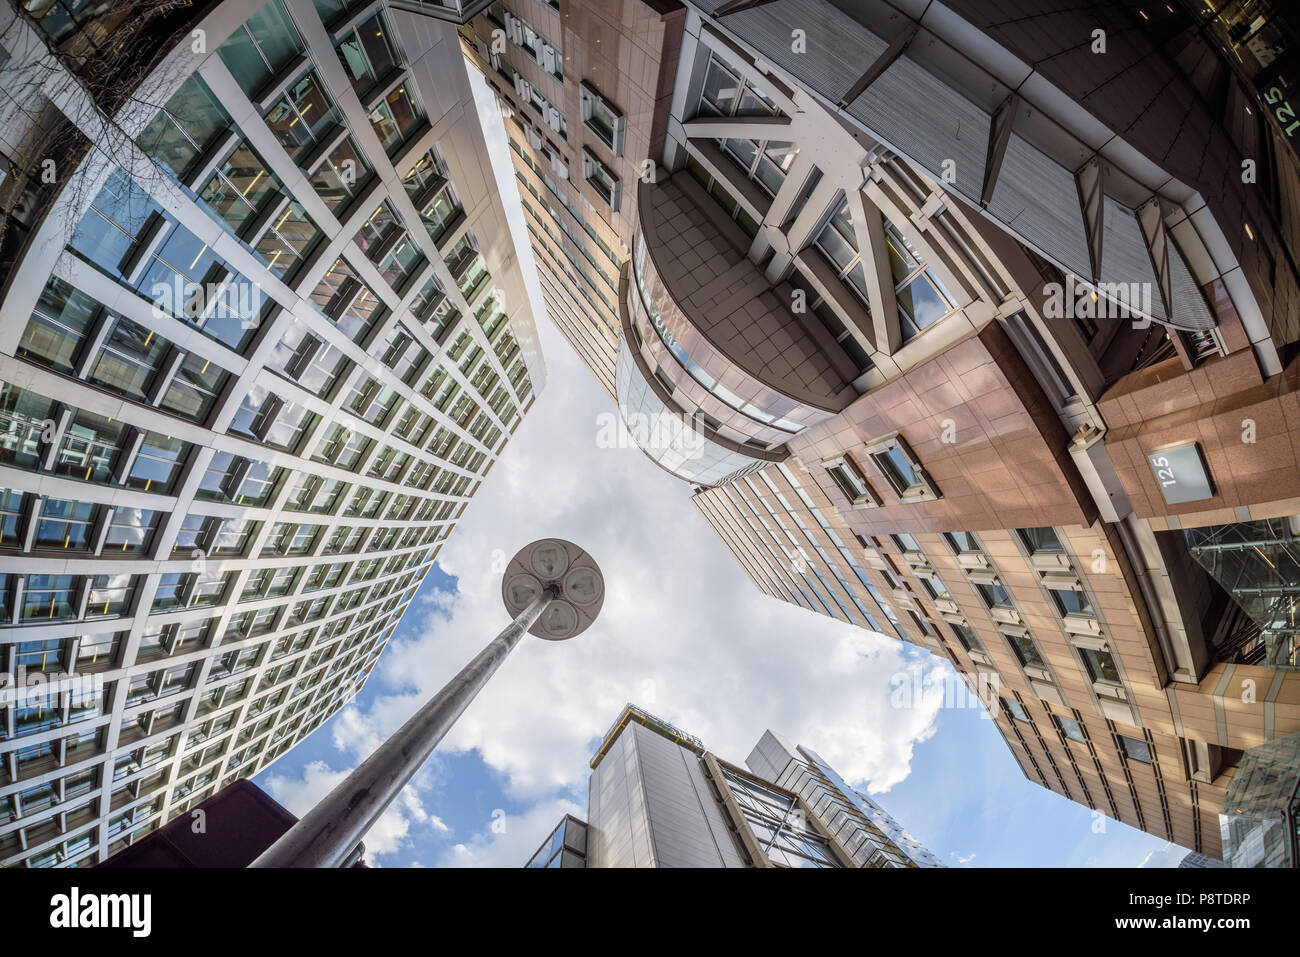 Wide angle view looking up at office buildings in central London Stock Photo